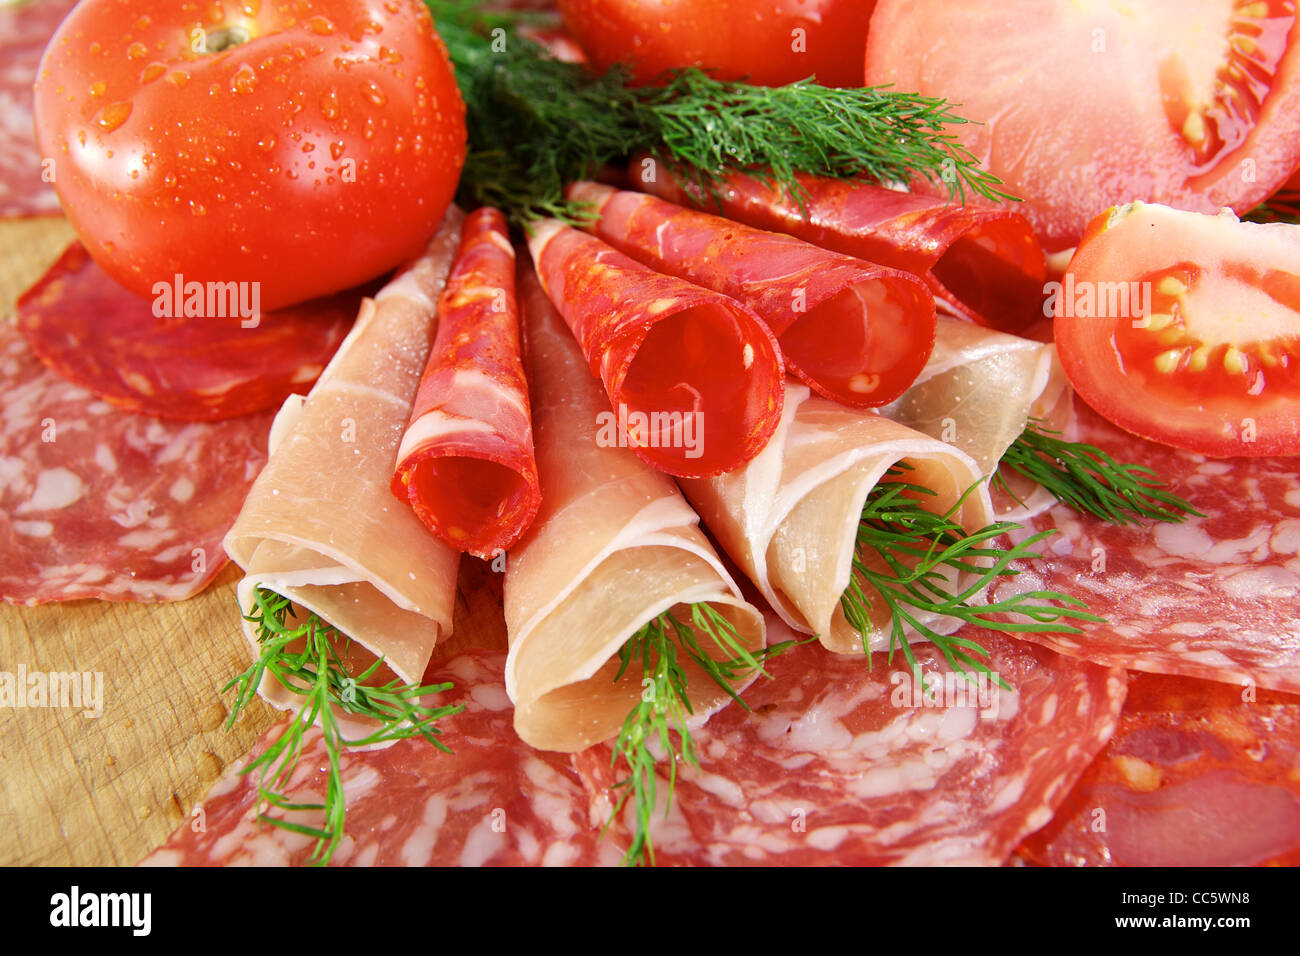 Smoked meat and salami on a wooden board Stock Photo